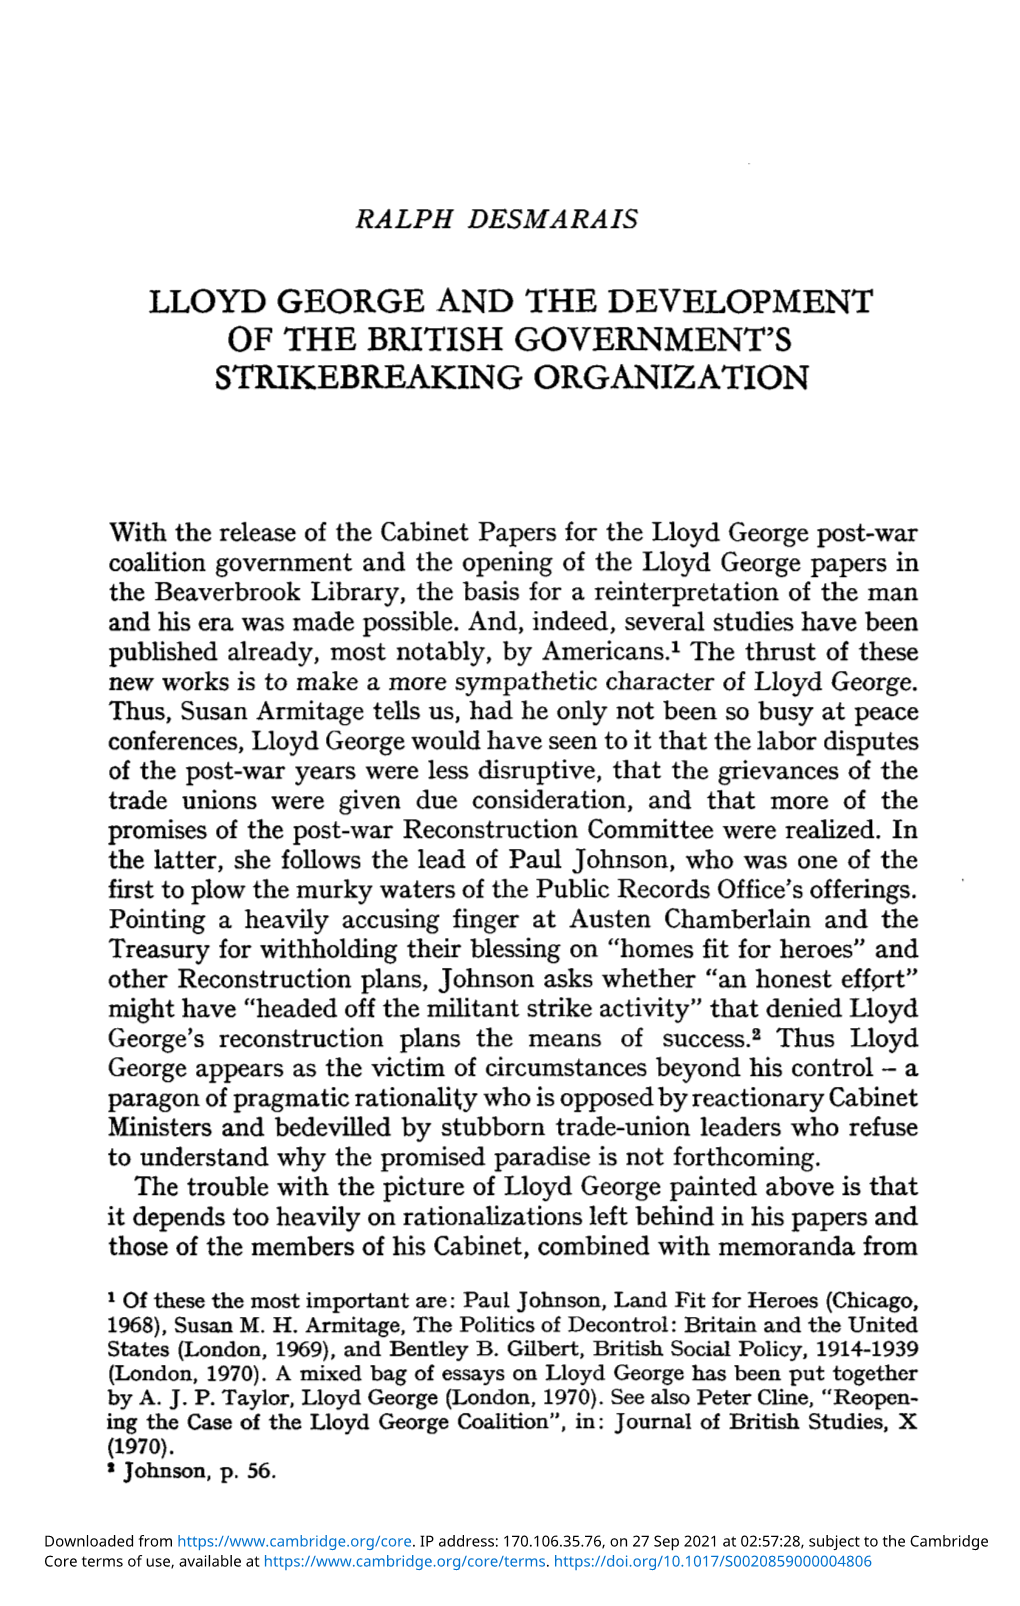 Lloyd George and the Development of the British Government's Strikebreaking Organization